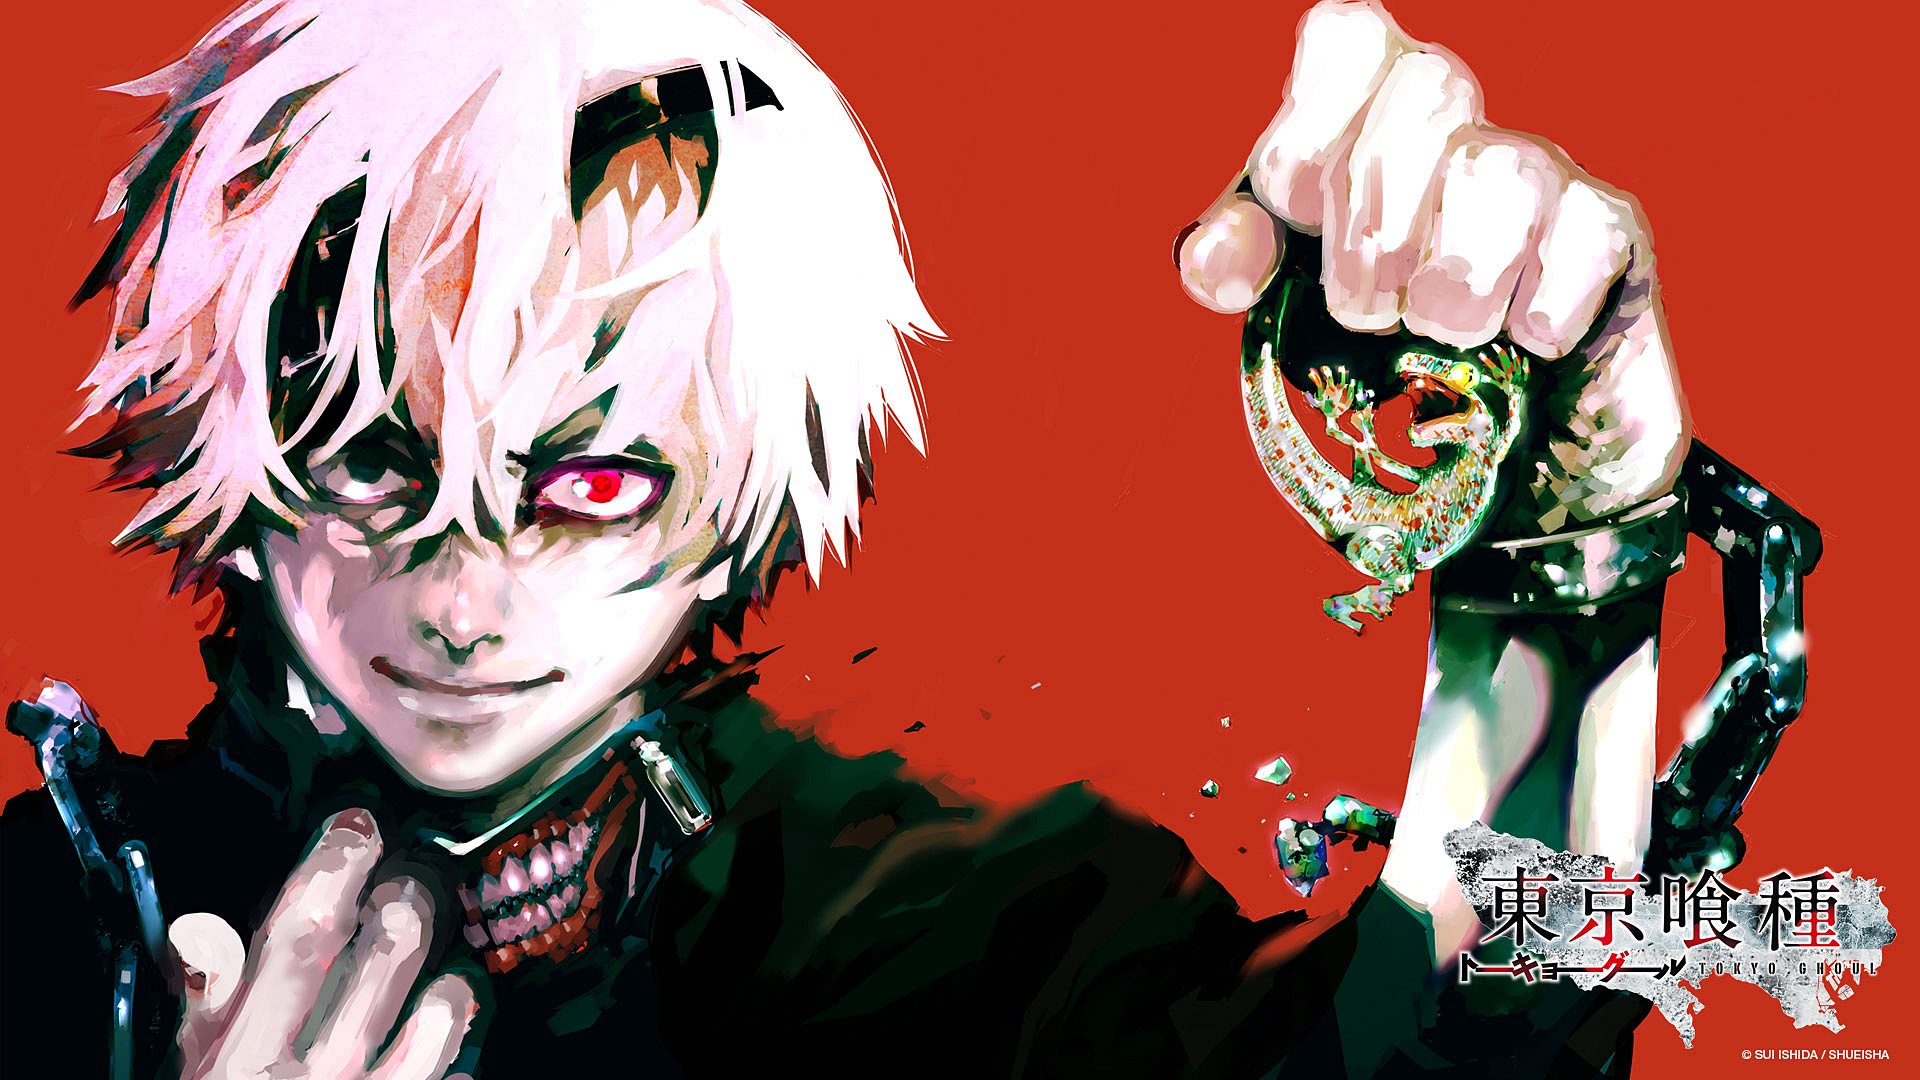 Tokyo Ghoul Volume 7 Cover - 1920x1080 Wallpaper 